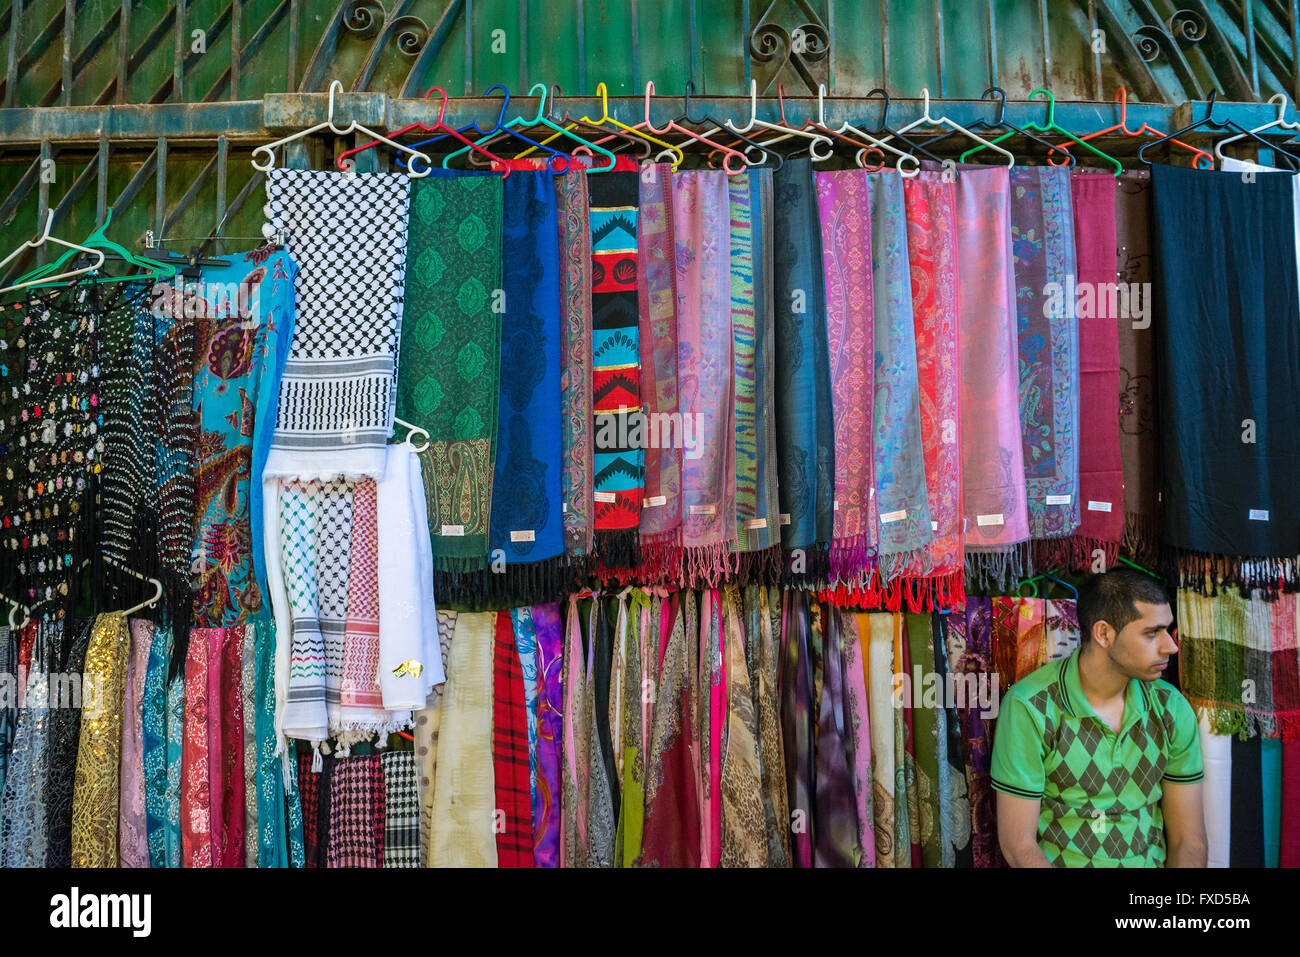 Man selling scarfs at Arab market that sprawls across Christian and Moslem Quarters on the Old City of Jerusalem, Israel Stock Photo